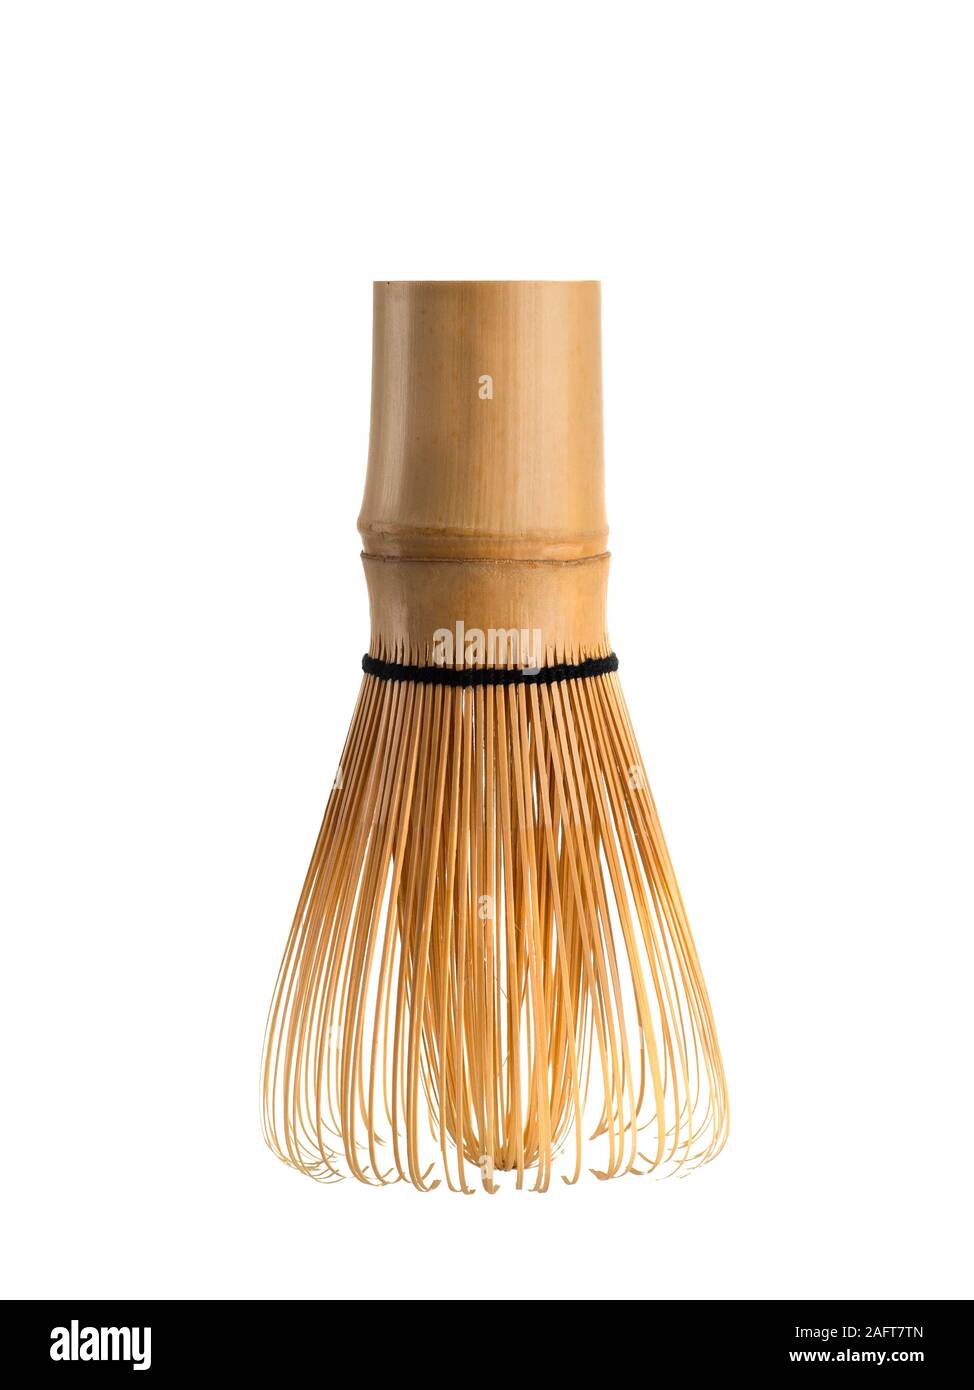 Bamboo Matcha Tea Whisk also know as chasen. Isolated on white background. Chasen use for japan green match tea Stock Photo